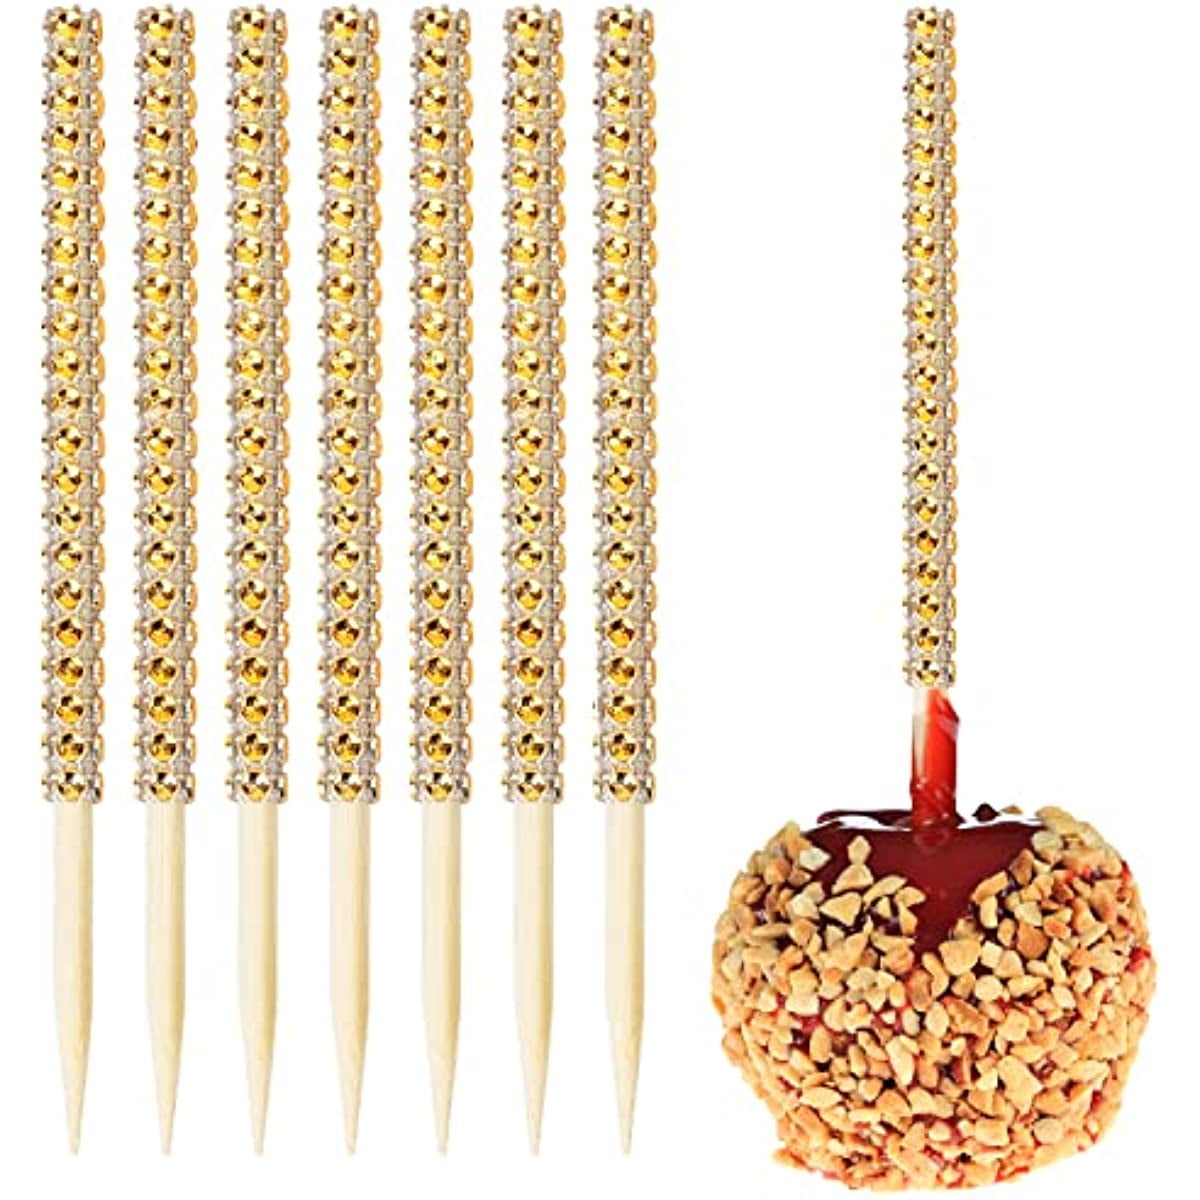 10pcs Bling Candy Apple Bamboo Sticks Caramel Apple Wooden Pointed